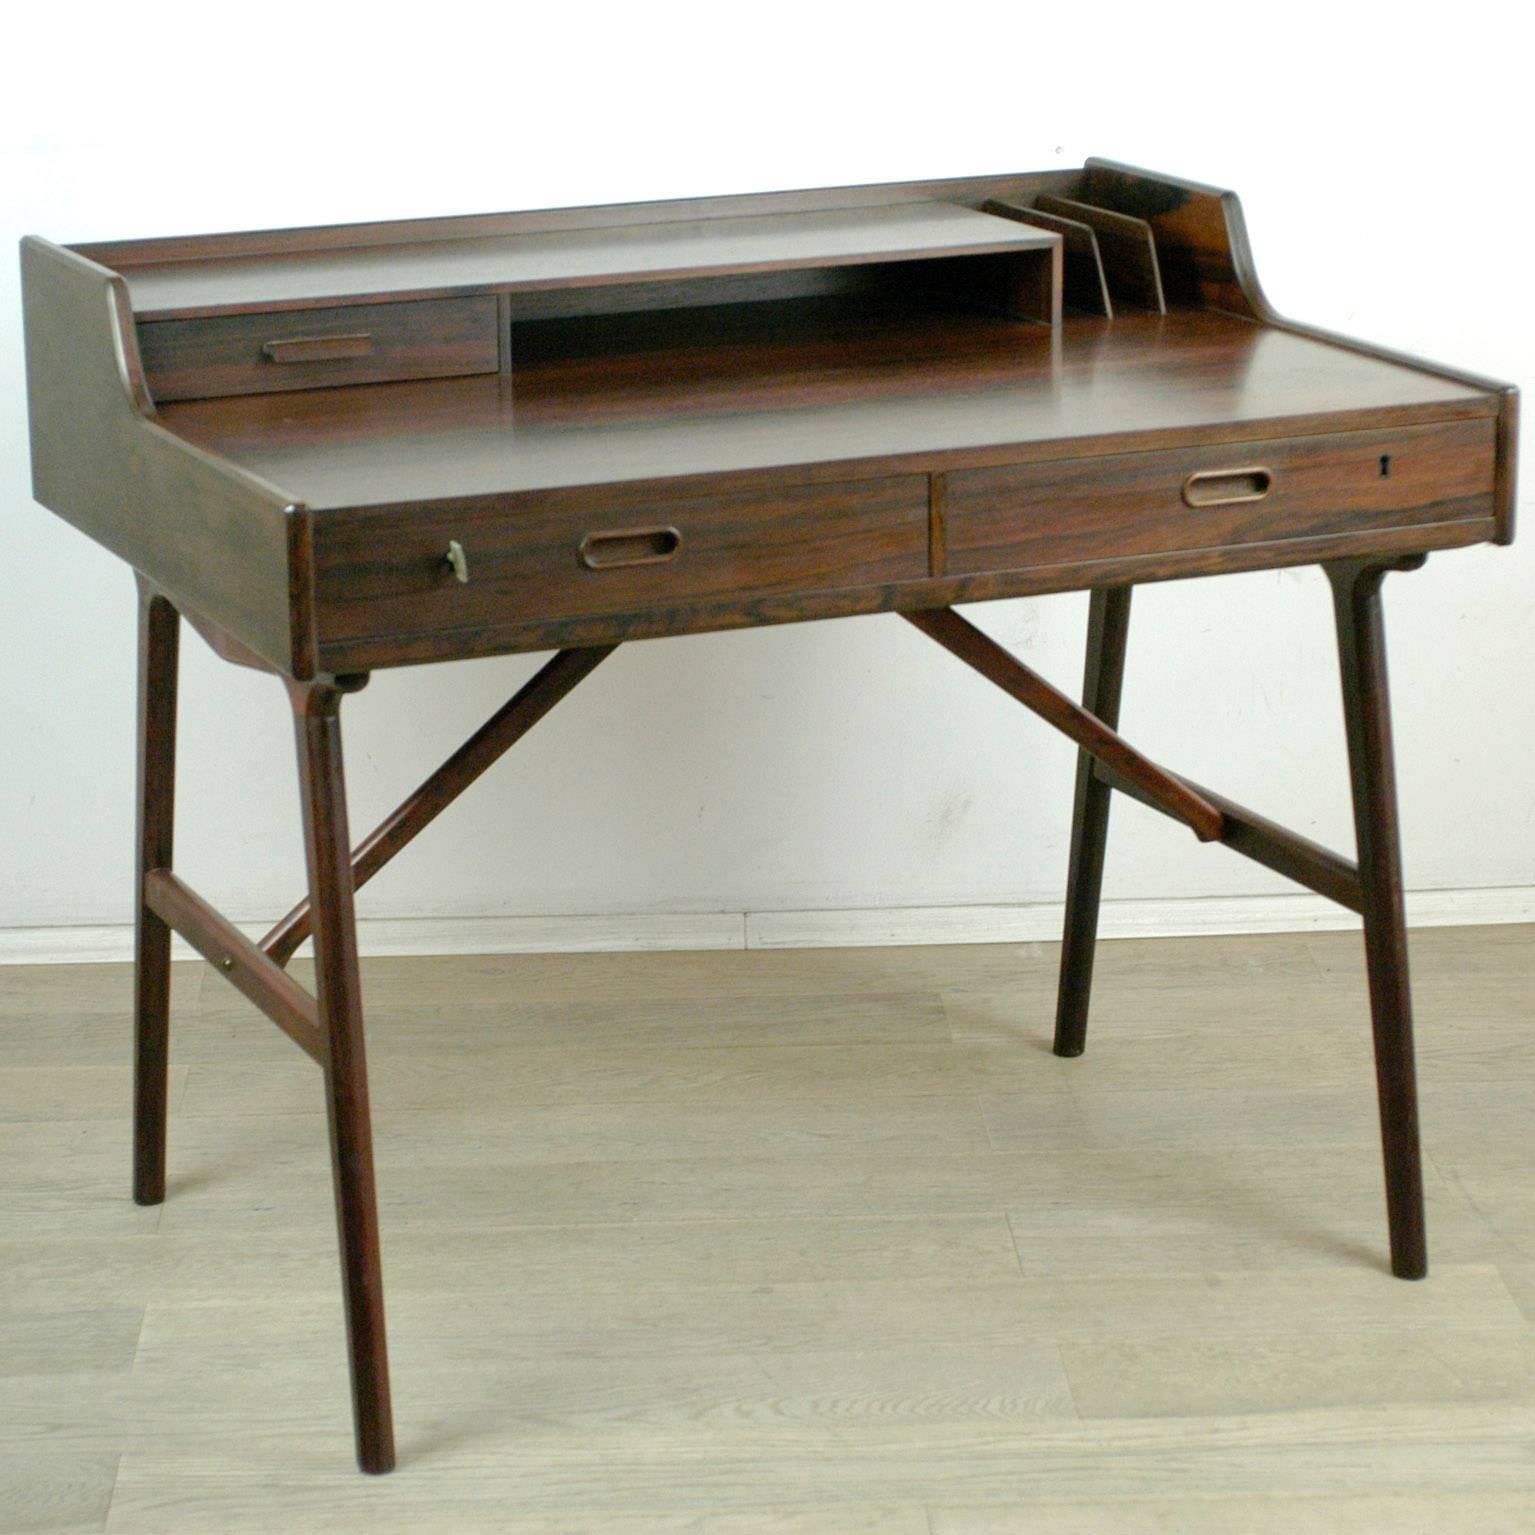 Wonderful Scandinavian desk with spraying legs, table top with drawer, storage shelf and folder, marked Danish design and manufacturers stamp on the underside. All beautiful original condition.
Mod no 56.